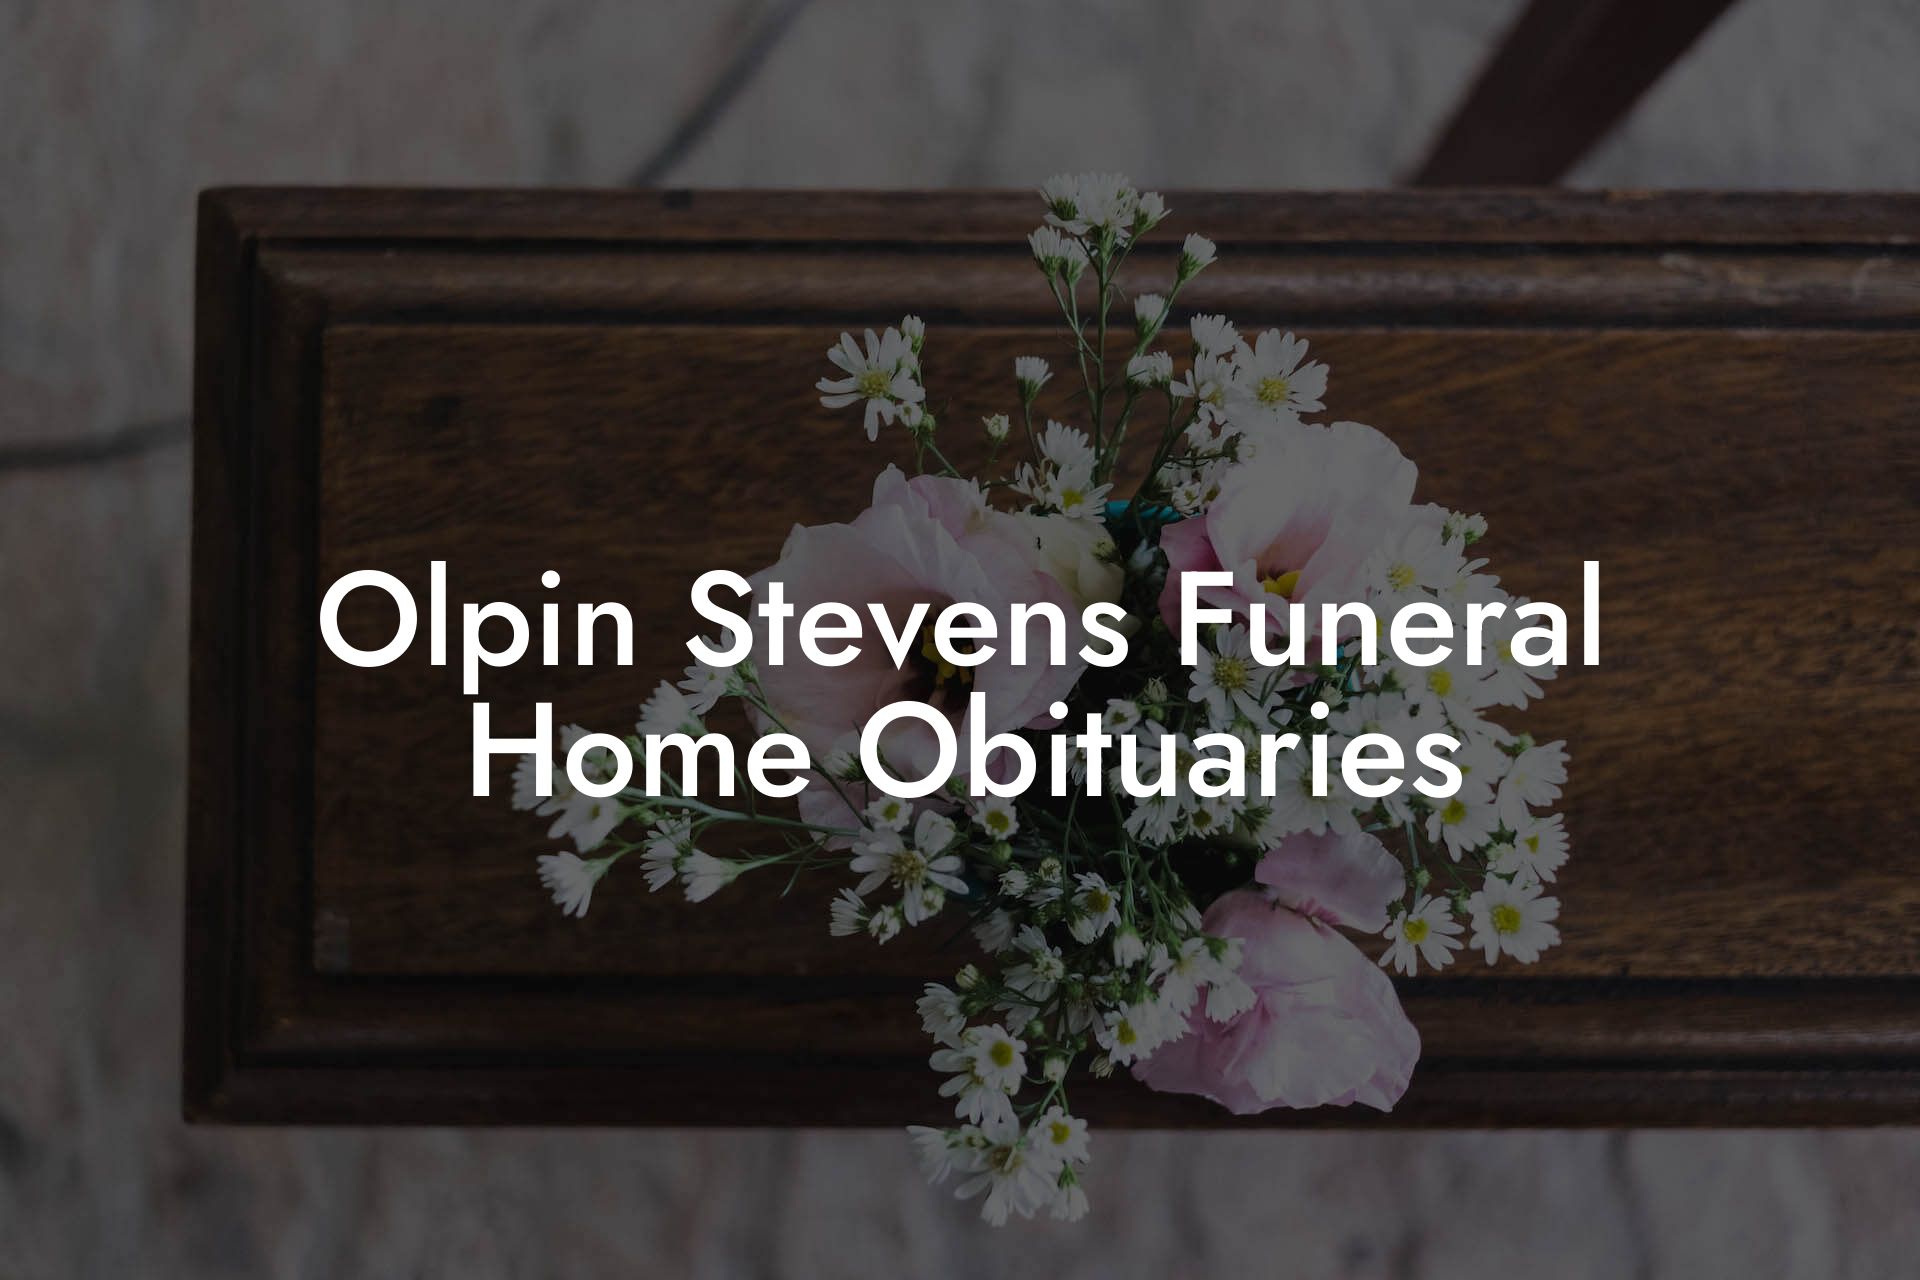 Olpin Stevens Funeral Home Obituaries